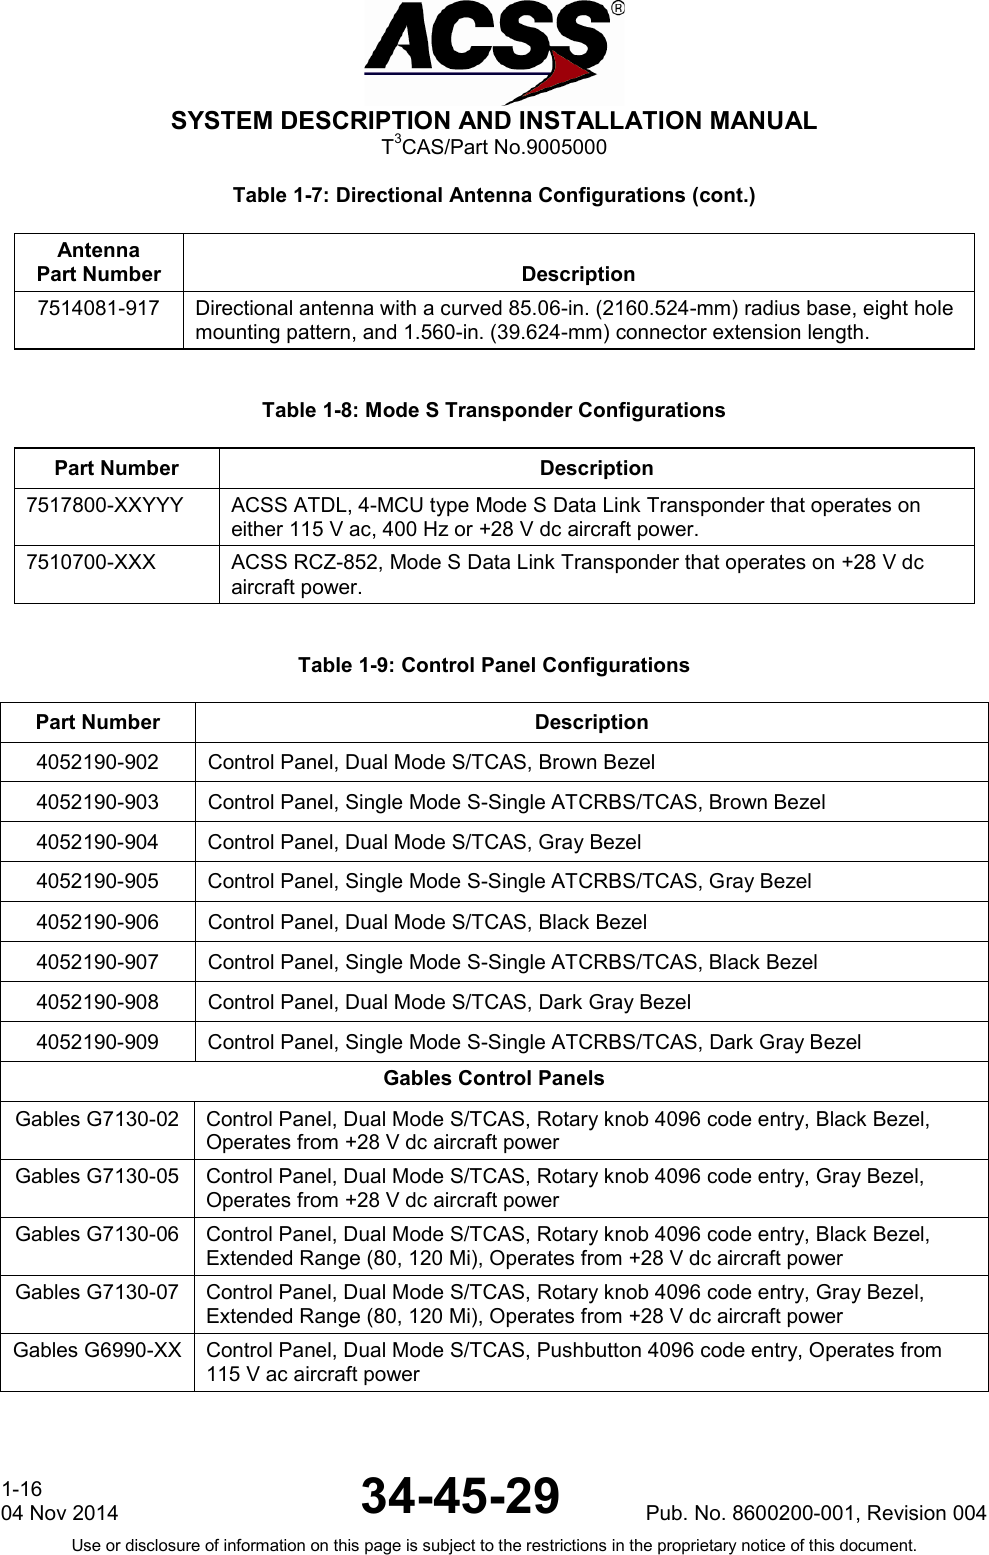  SYSTEM DESCRIPTION AND INSTALLATION MANUAL T3CAS/Part No.9005000 Table 1-7: Directional Antenna Configurations (cont.) Antenna Part Number Description 7514081-917 Directional antenna with a curved 85.06-in. (2160.524-mm) radius base, eight hole mounting pattern, and 1.560-in. (39.624-mm) connector extension length.  Table 1-8: Mode S Transponder Configurations Part Number Description 7517800-XXYYY ACSS ATDL, 4-MCU type Mode S Data Link Transponder that operates on either 115 V ac, 400 Hz or +28 V dc aircraft power. 7510700-XXX ACSS RCZ-852, Mode S Data Link Transponder that operates on +28 V dc aircraft power.  Table 1-9: Control Panel Configurations Part Number Description 4052190-902 Control Panel, Dual Mode S/TCAS, Brown Bezel 4052190-903 Control Panel, Single Mode S-Single ATCRBS/TCAS, Brown Bezel 4052190-904  Control Panel, Dual Mode S/TCAS, Gray Bezel 4052190-905  Control Panel, Single Mode S-Single ATCRBS/TCAS, Gray Bezel 4052190-906 Control Panel, Dual Mode S/TCAS, Black Bezel 4052190-907 Control Panel, Single Mode S-Single ATCRBS/TCAS, Black Bezel 4052190-908 Control Panel, Dual Mode S/TCAS, Dark Gray Bezel 4052190-909  Control Panel, Single Mode S-Single ATCRBS/TCAS, Dark Gray Bezel Gables Control Panels Gables G7130-02 Control Panel, Dual Mode S/TCAS, Rotary knob 4096 code entry, Black Bezel, Operates from +28 V dc aircraft power  Gables G7130-05 Control Panel, Dual Mode S/TCAS, Rotary knob 4096 code entry, Gray Bezel, Operates from +28 V dc aircraft power Gables G7130-06 Control Panel, Dual Mode S/TCAS, Rotary knob 4096 code entry, Black Bezel, Extended Range (80, 120 Mi), Operates from +28 V dc aircraft power Gables G7130-07 Control Panel, Dual Mode S/TCAS, Rotary knob 4096 code entry, Gray Bezel, Extended Range (80, 120 Mi), Operates from +28 V dc aircraft power Gables G6990-XX Control Panel, Dual Mode S/TCAS, Pushbutton 4096 code entry, Operates from 115 V ac aircraft power  1-16 04 Nov 2014 34-45-29 Pub. No. 8600200-001, Revision 004 Use or disclosure of information on this page is subject to the restrictions in the proprietary notice of this document.  